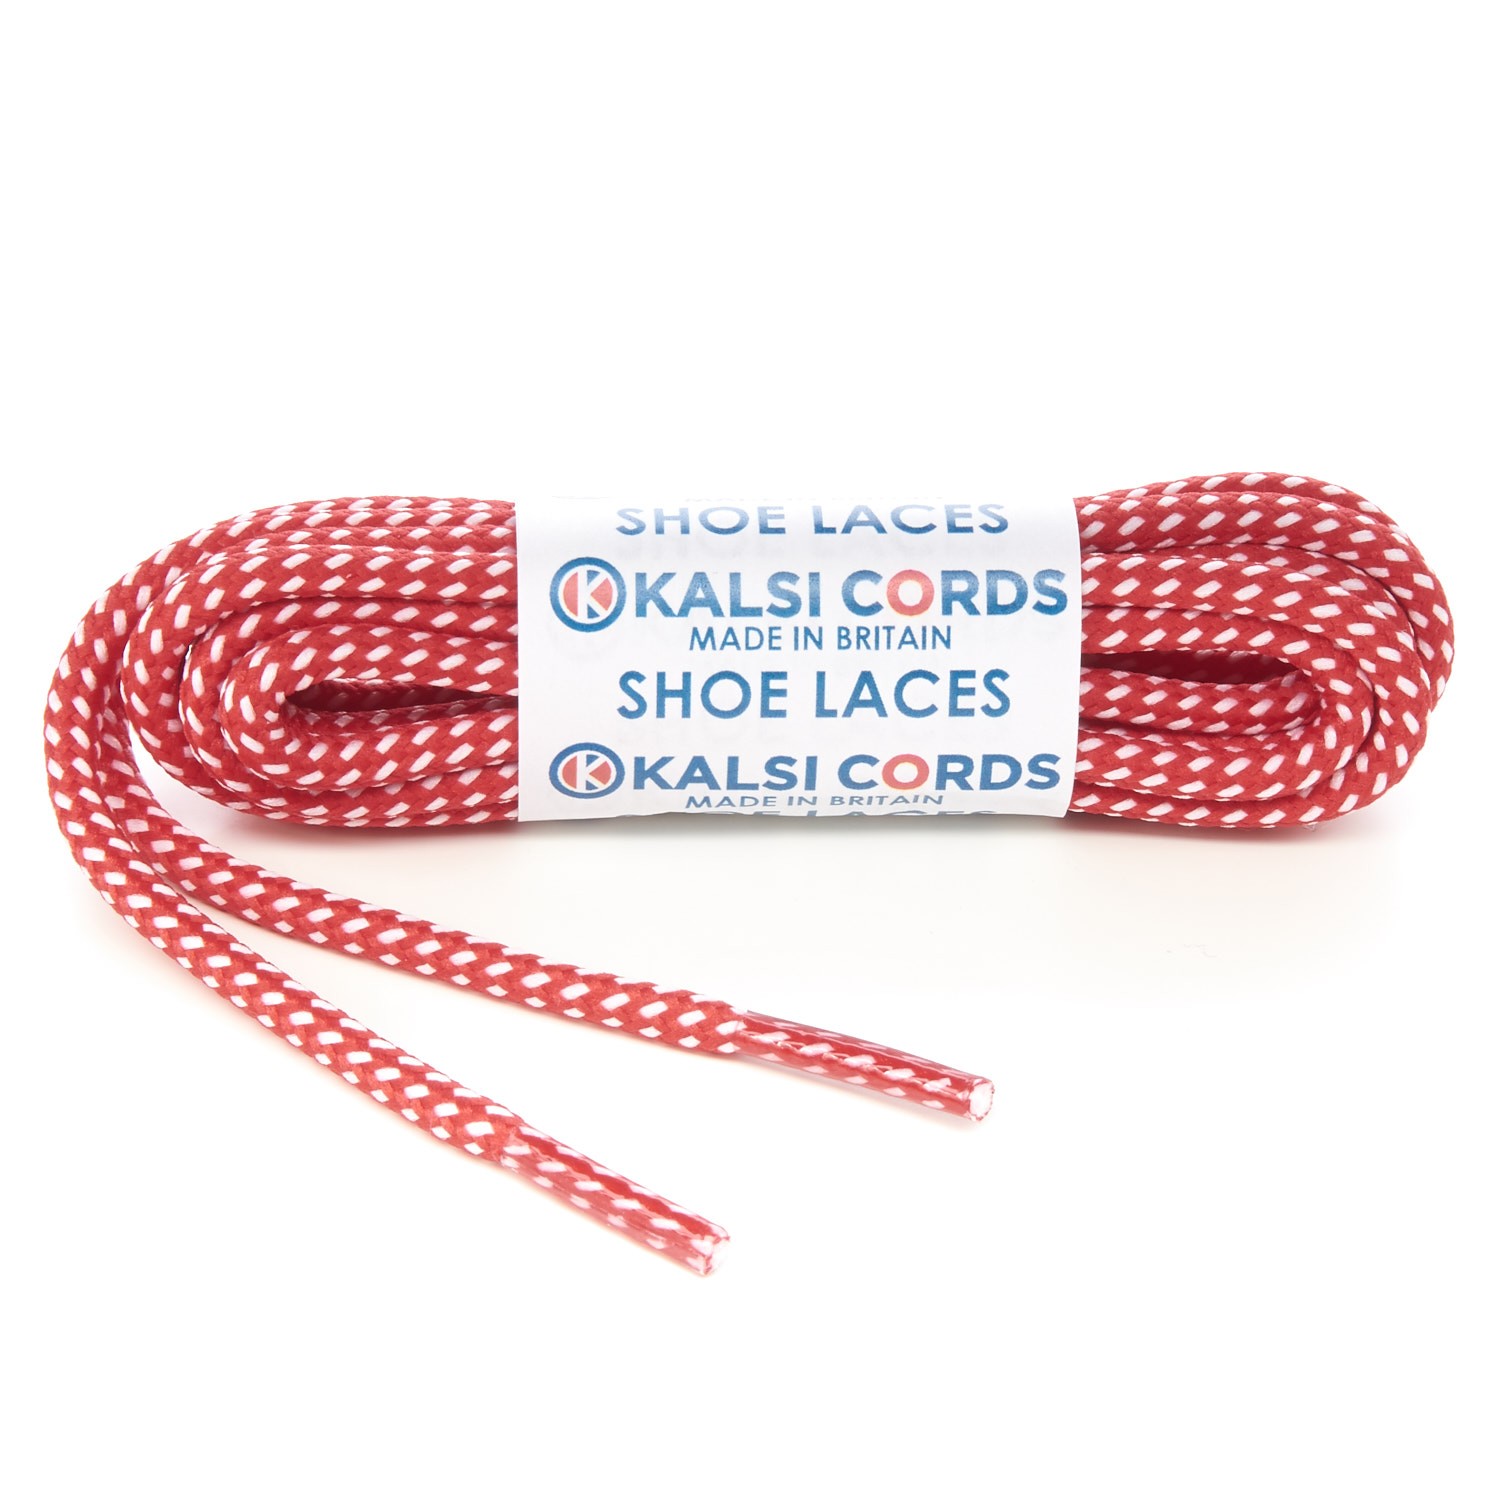 Red with White Fleck 5mm Round Cord Shoe Laces Kalsi Cords